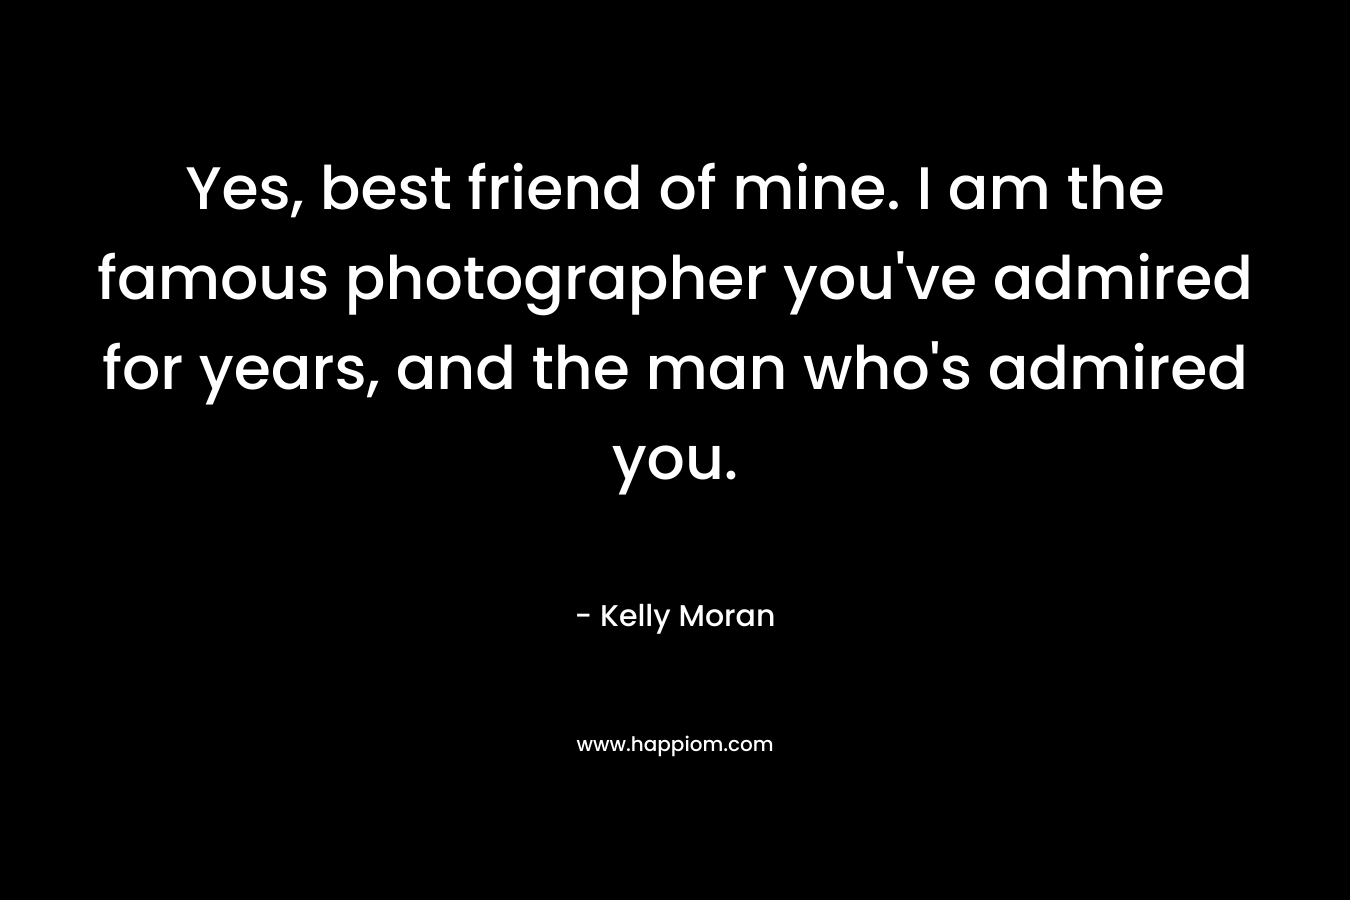 Yes, best friend of mine. I am the famous photographer you've admired for years, and the man who's admired you.